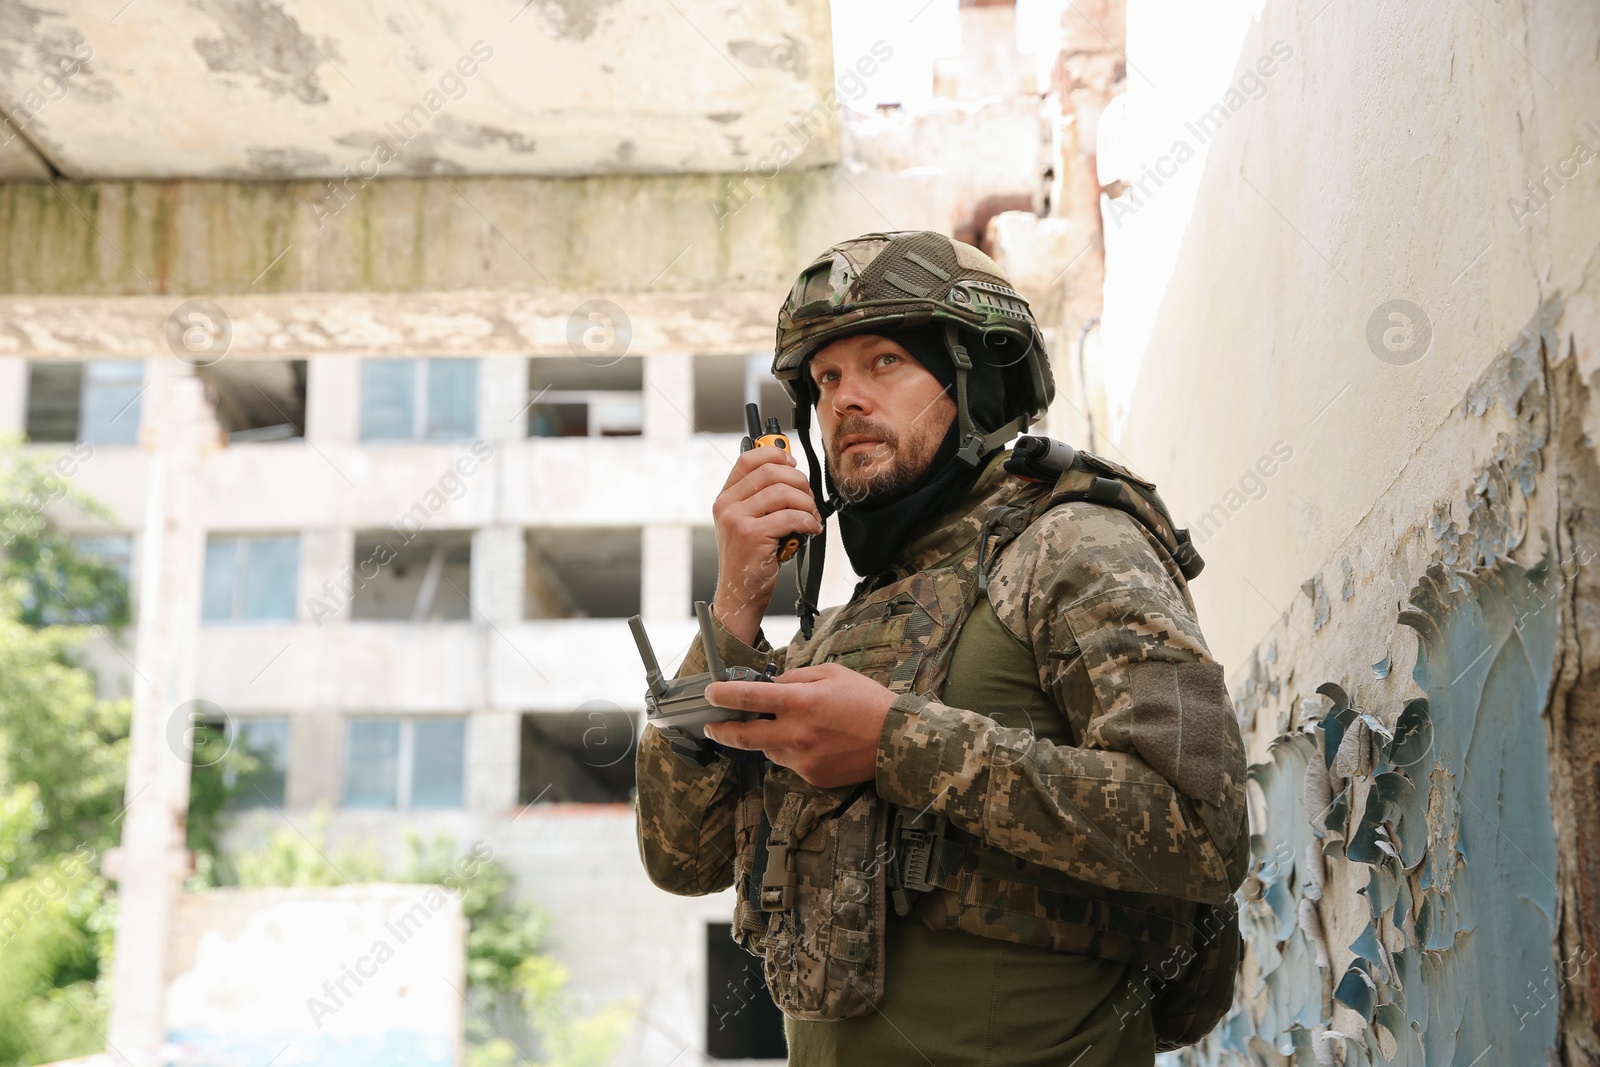 Photo of Military mission. Soldier in uniform with drone controller and radio transmitter near abandoned building outdoors, low angle view. Space for text